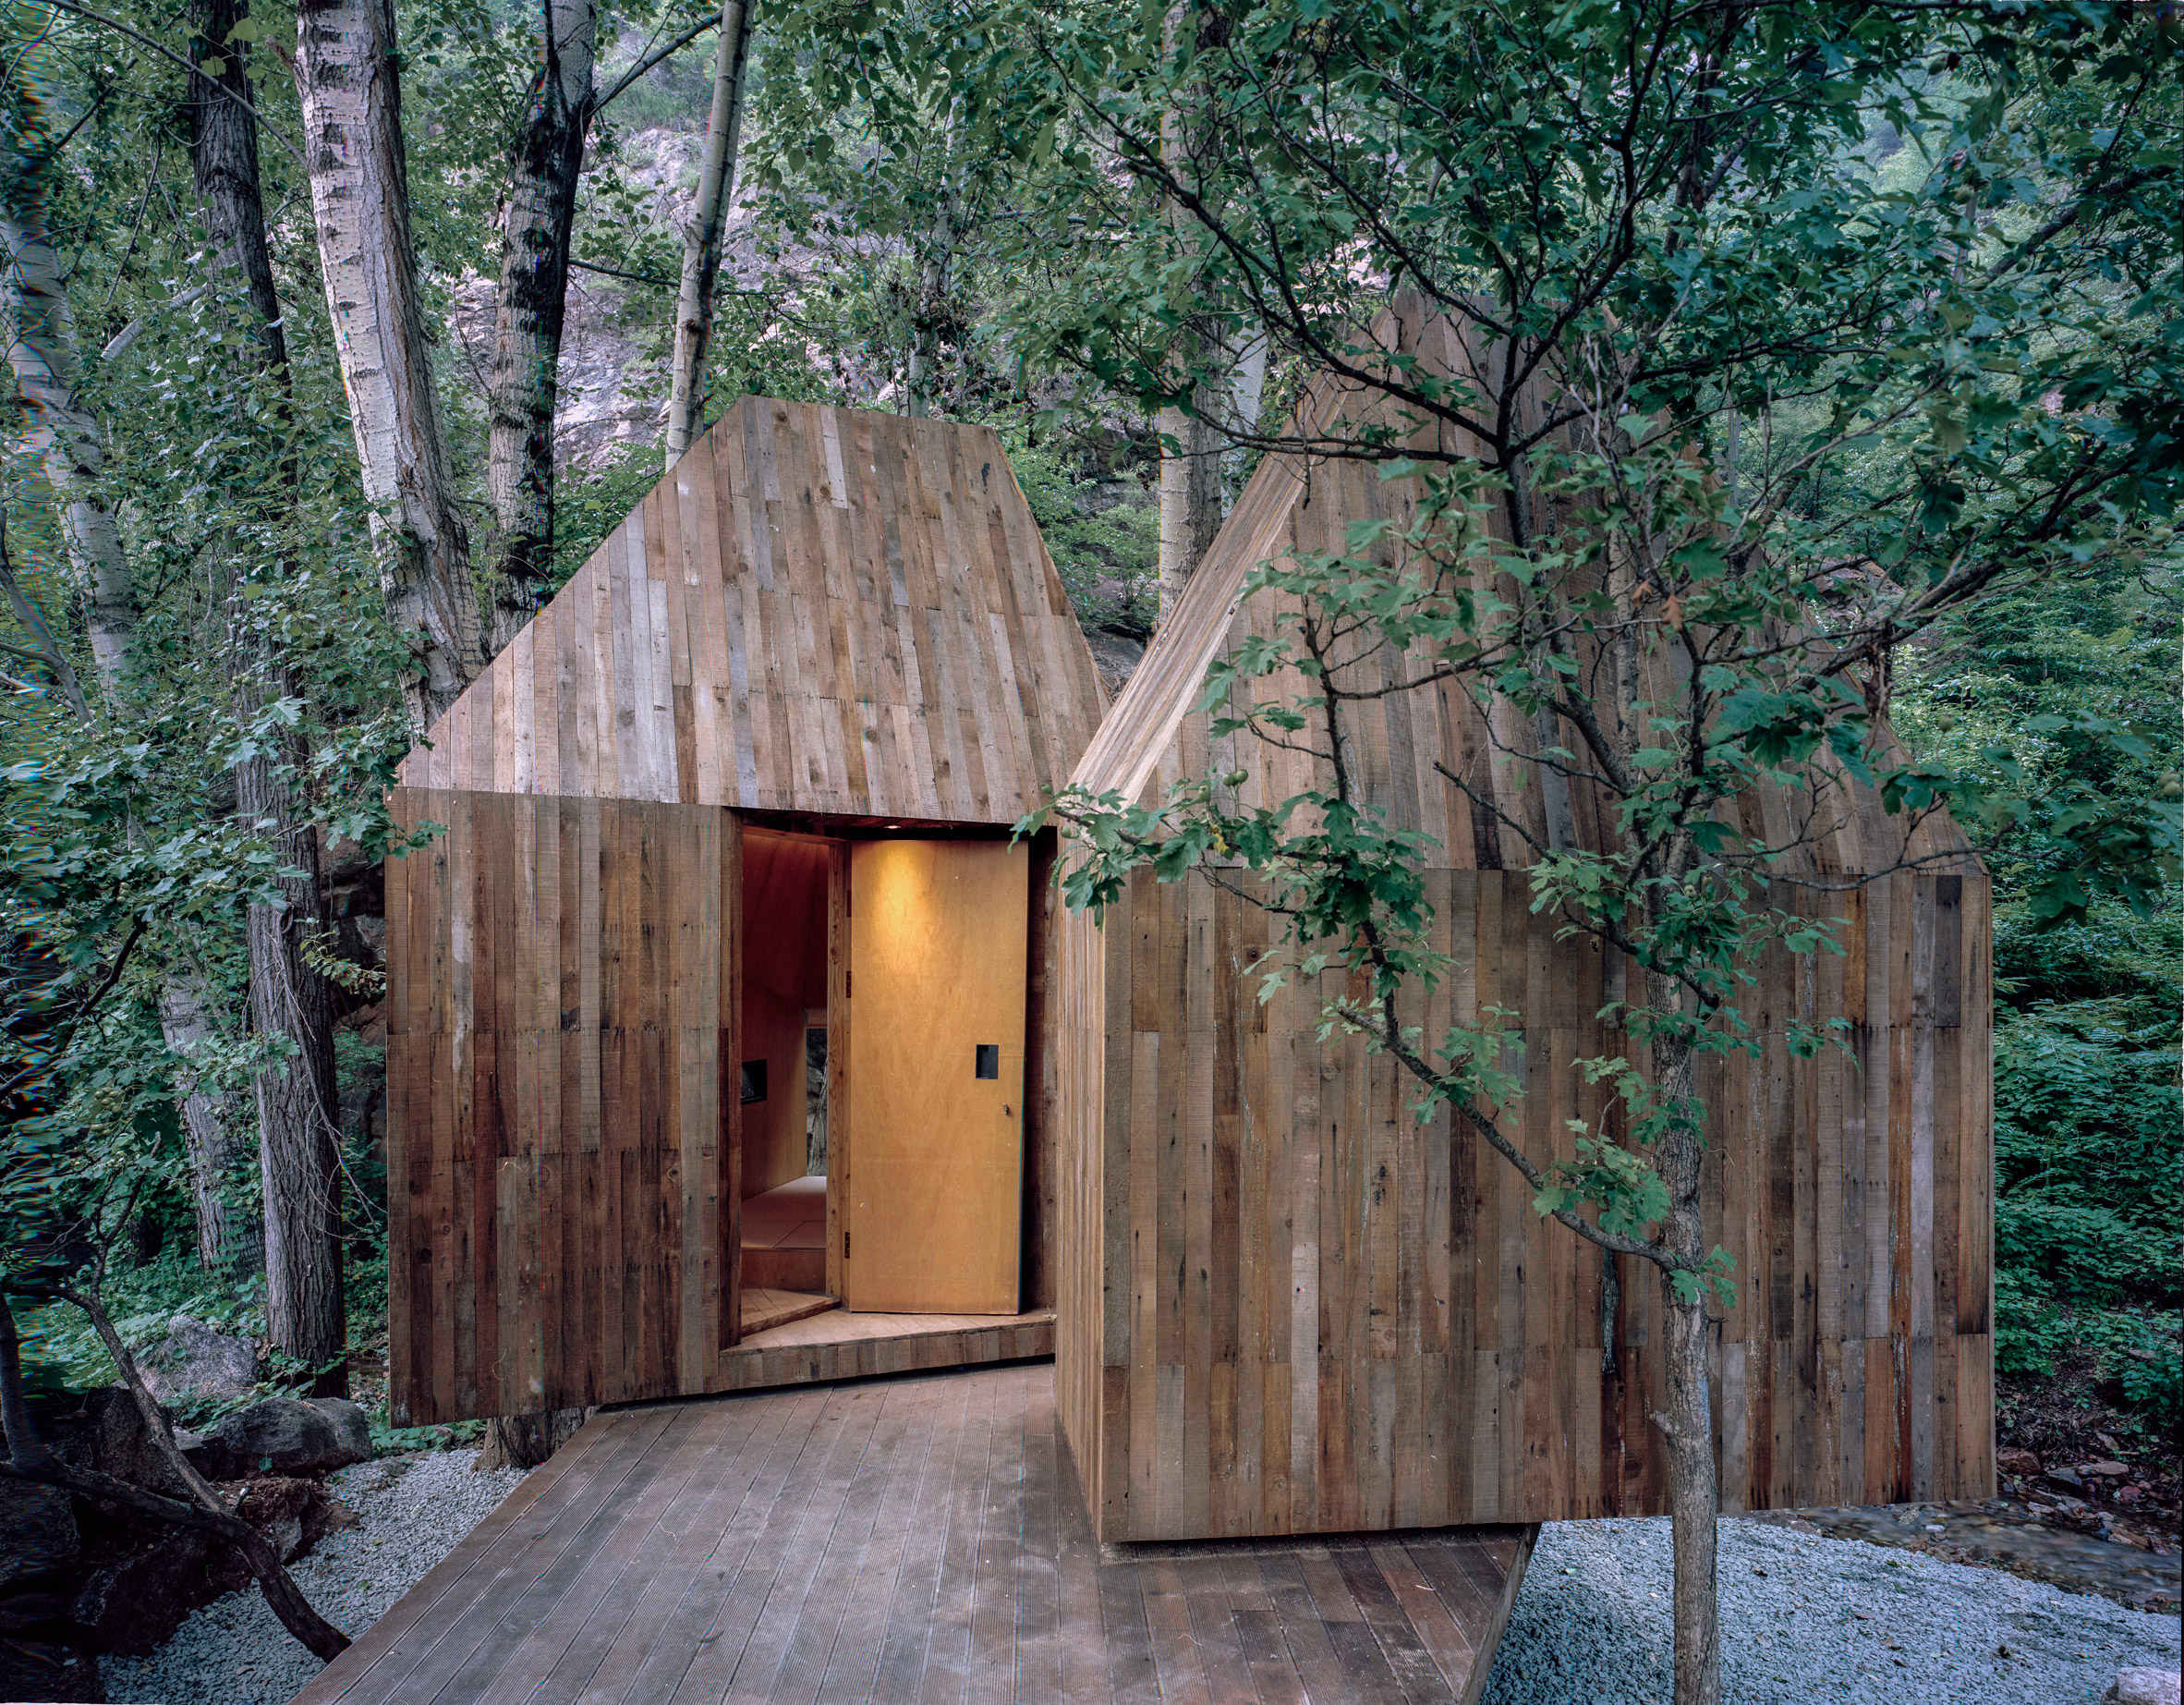 The Treehouse by Wee Studio